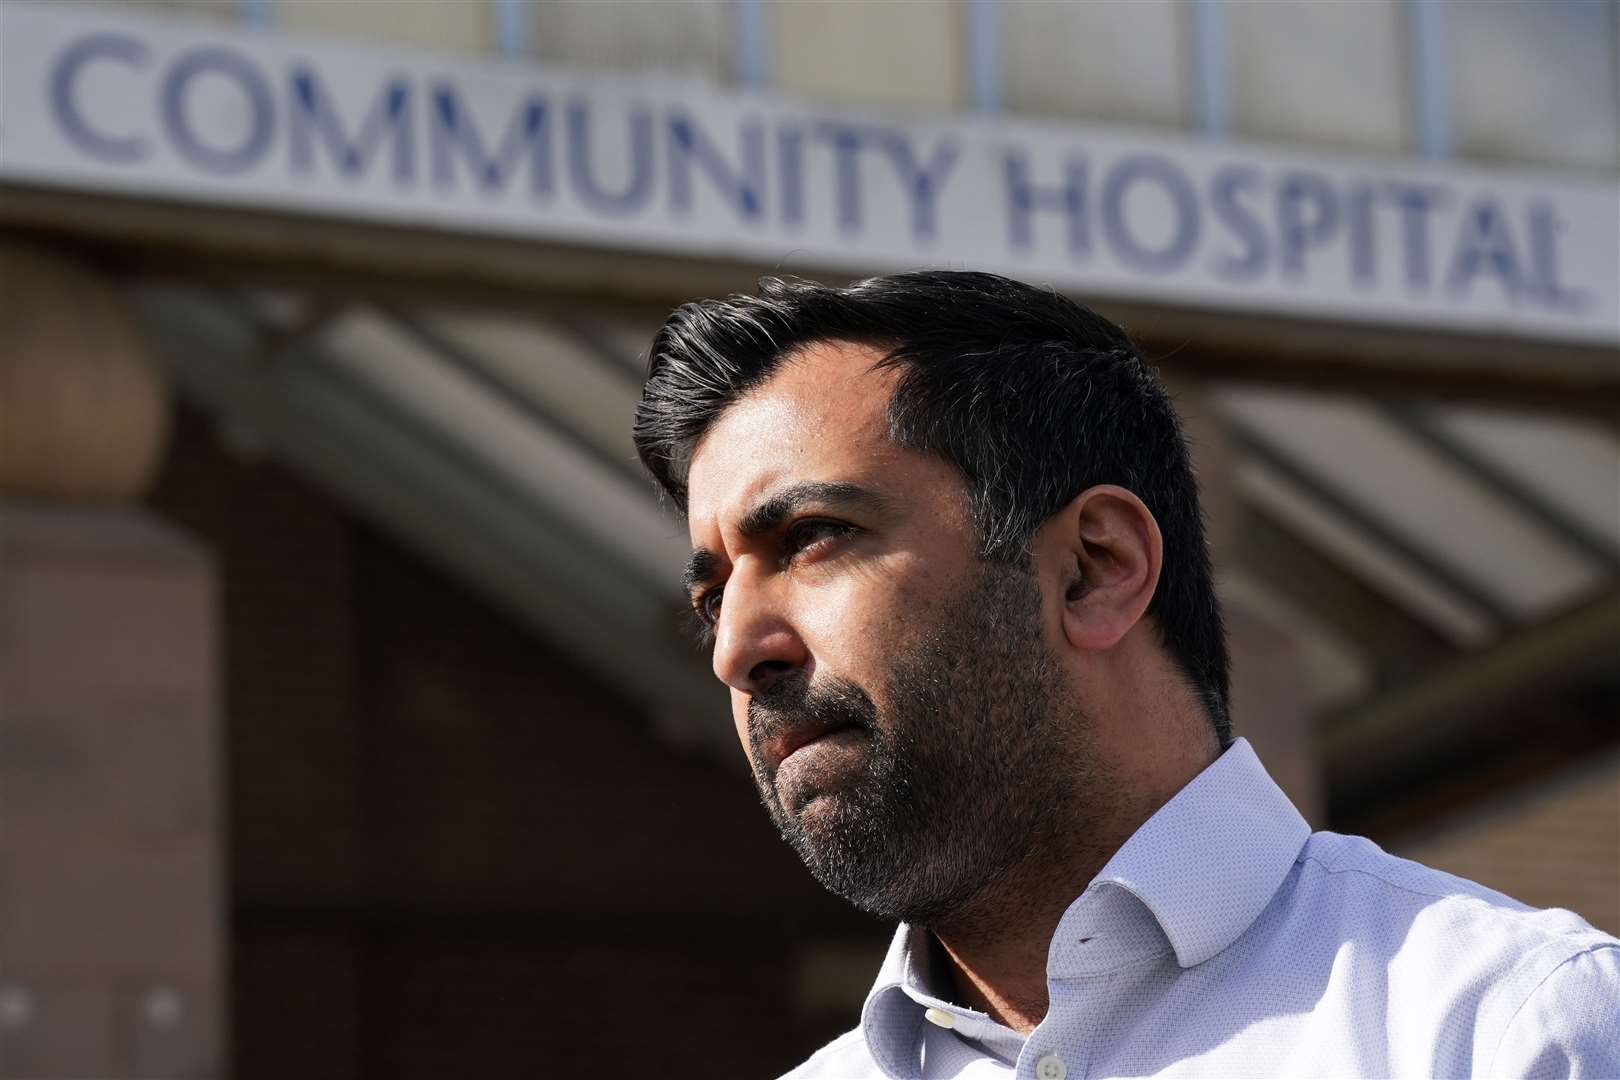 Health Secretary Humza Yousaf who, it has been reported, is expected to enter the race to become the next SNP leader (Andrew Milligan/PA)